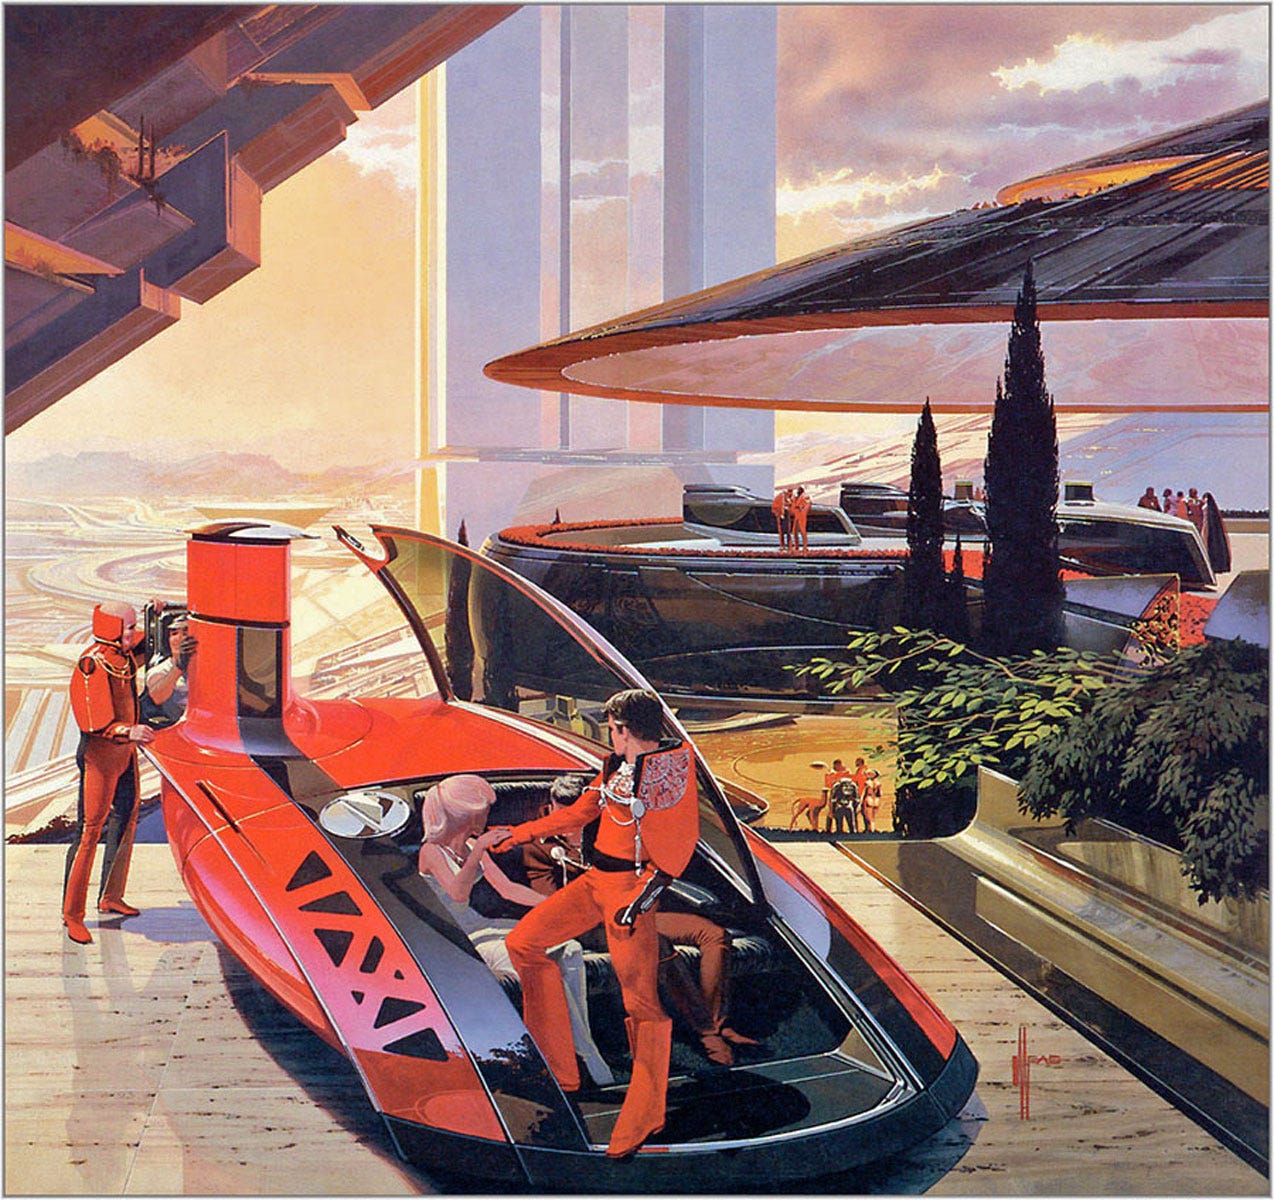 Book notes: Syd Mead's 'Sentinel II' - by Adam Rowe